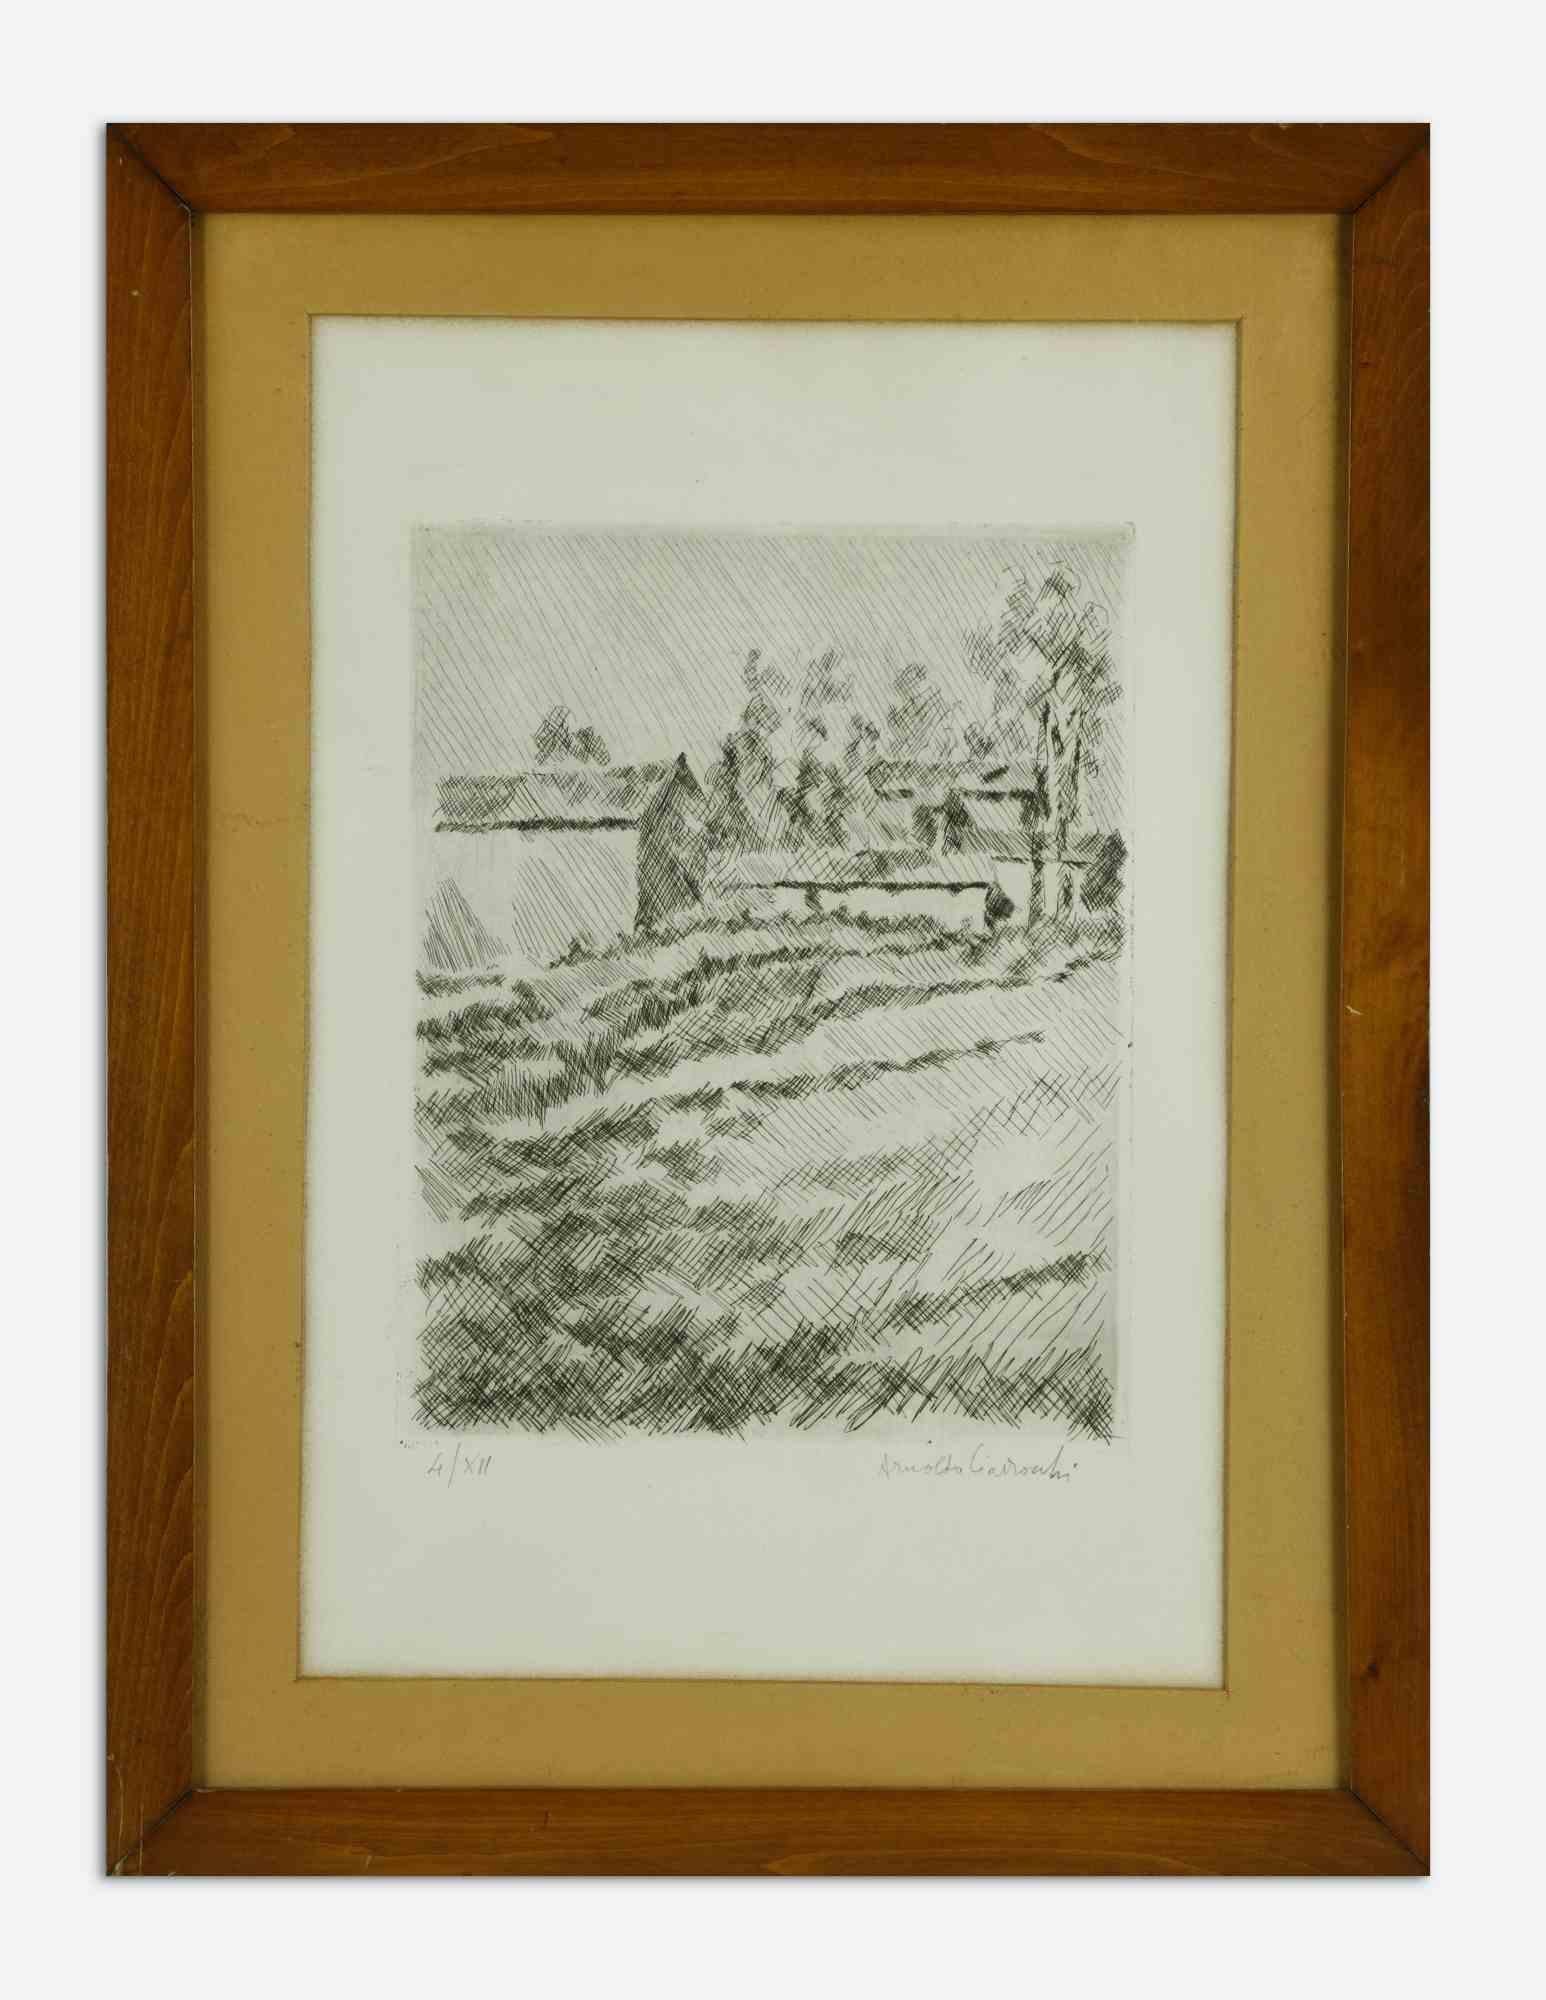 Landscape is a modern artwork realized by Arnoldo Ciarrocchi in the mid-20th Century.

Black and white etching.

Hand signed and numbered on the lower margin

Edition of 4/XII.

Includes frame: 58.5 X 1.5 X 44.5 cm